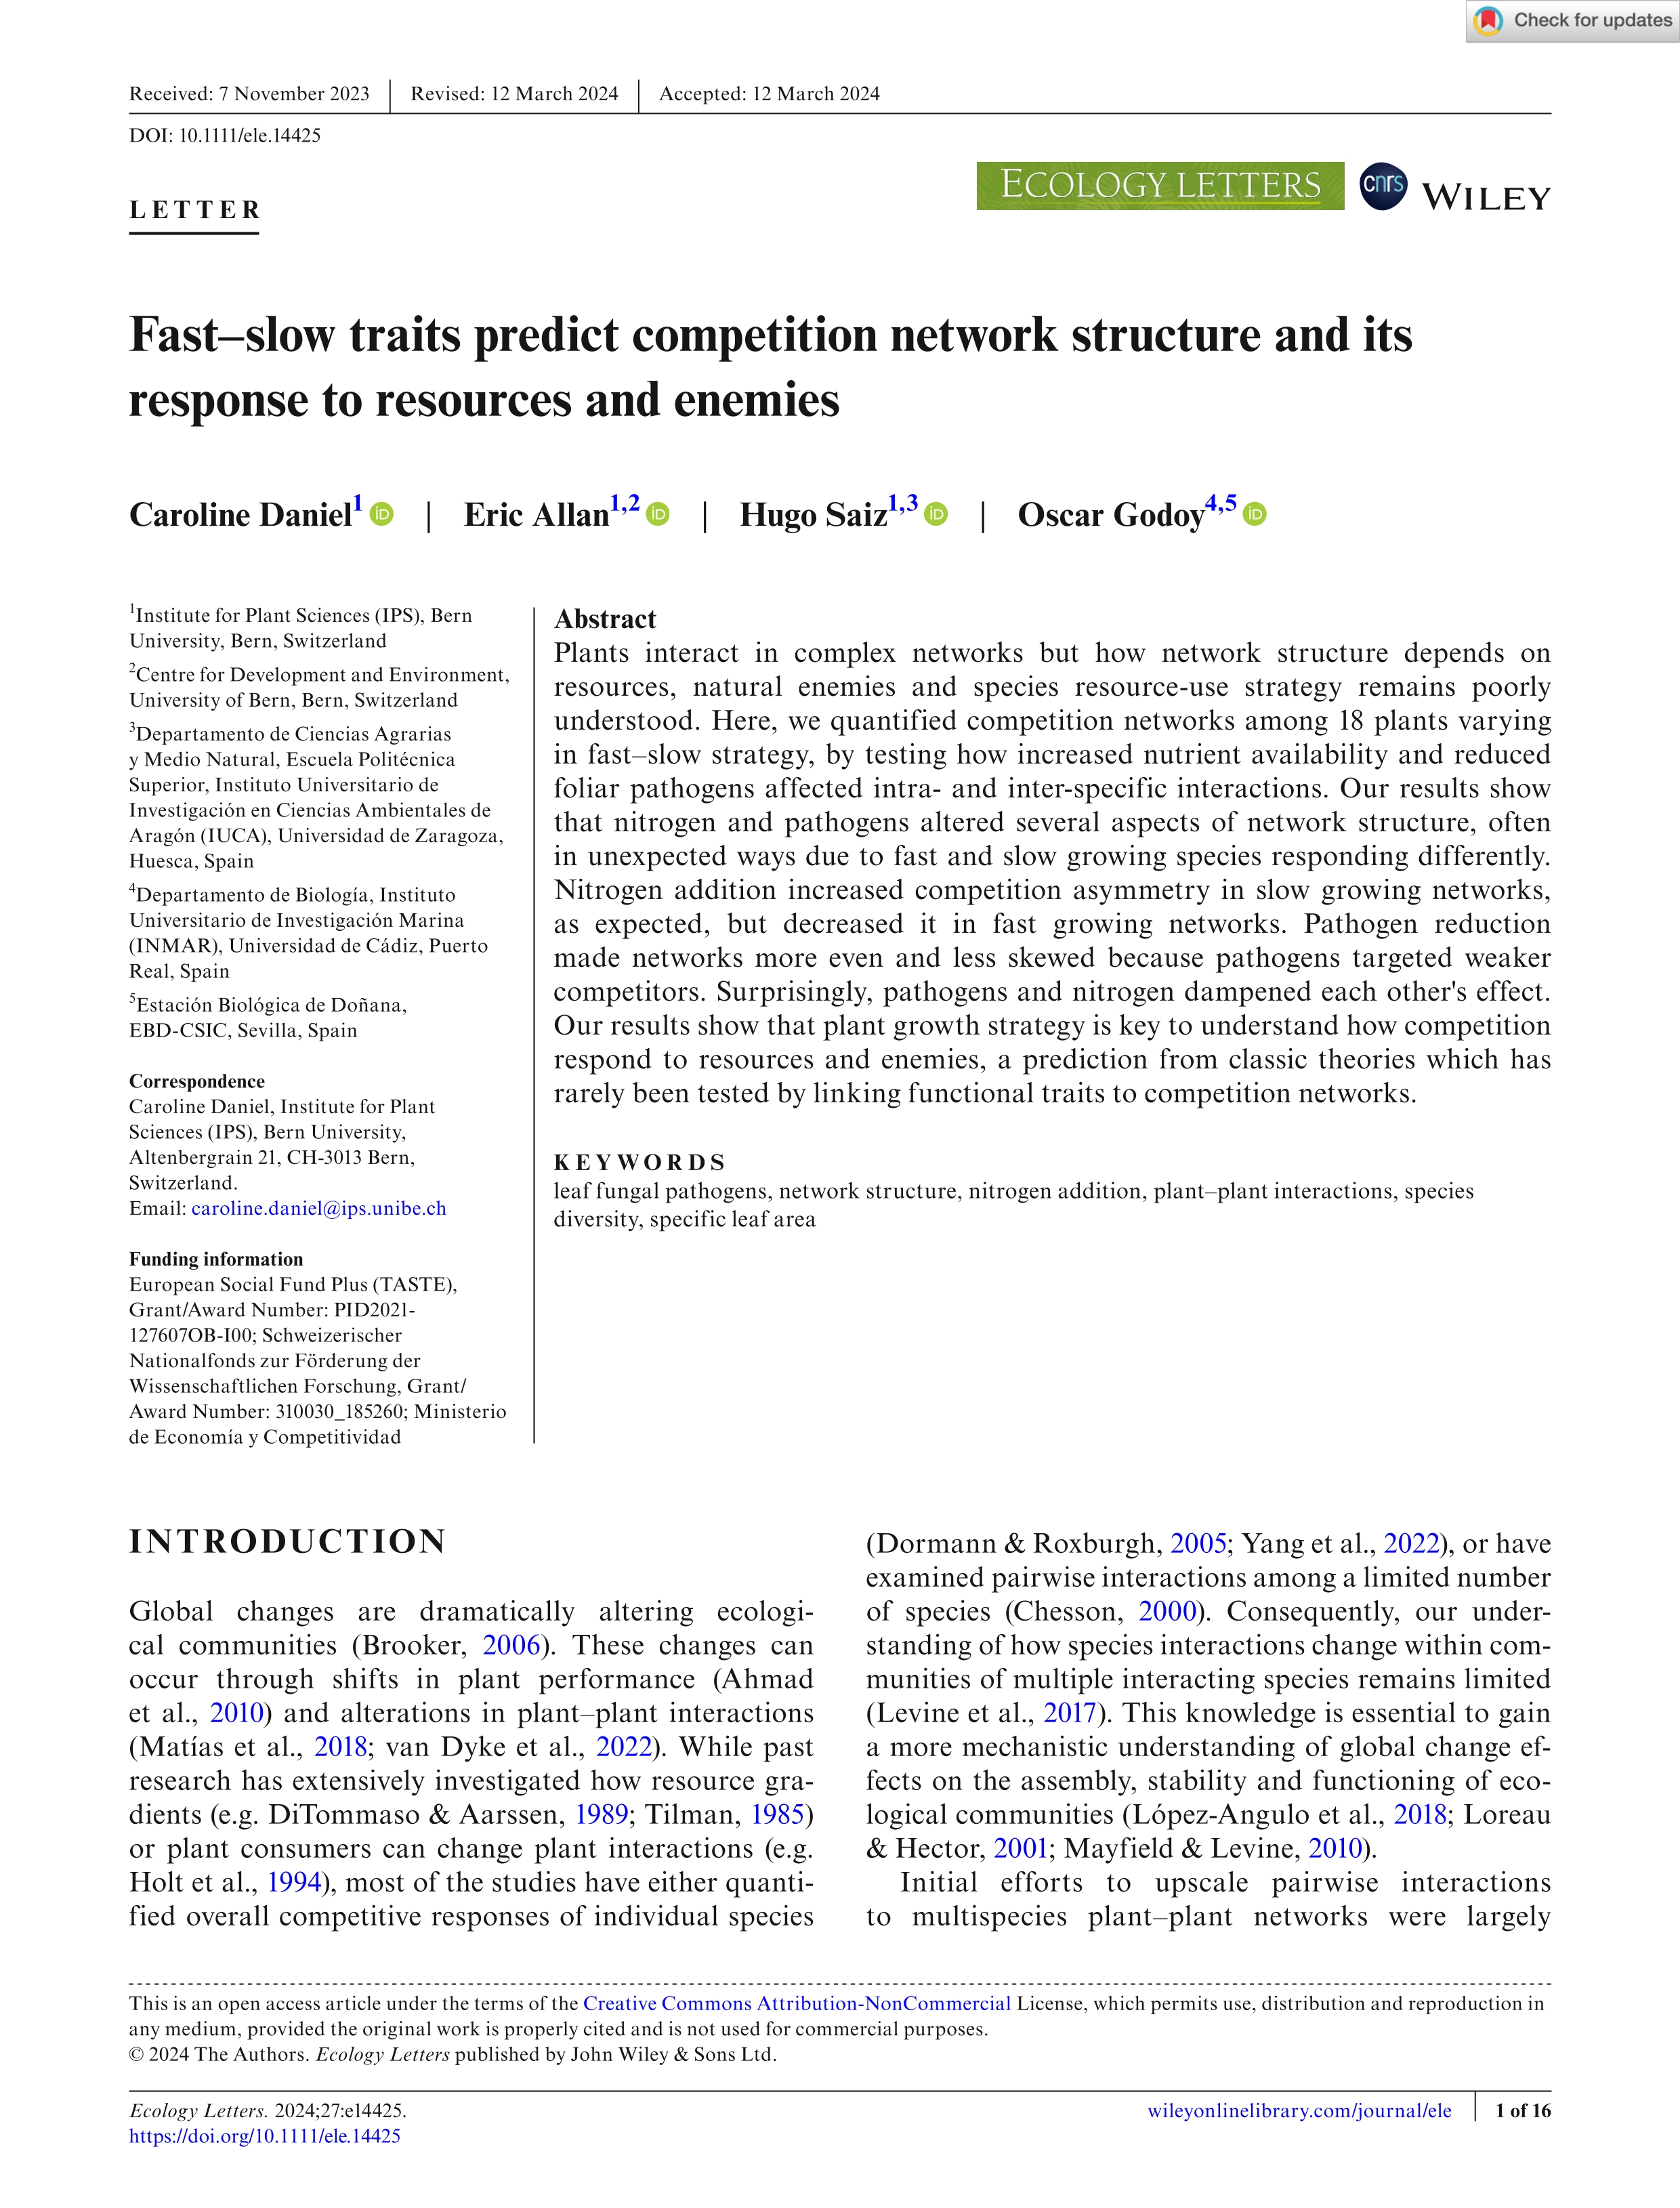 Fast–slow traits predict competition network structure and its response to resources and enemies